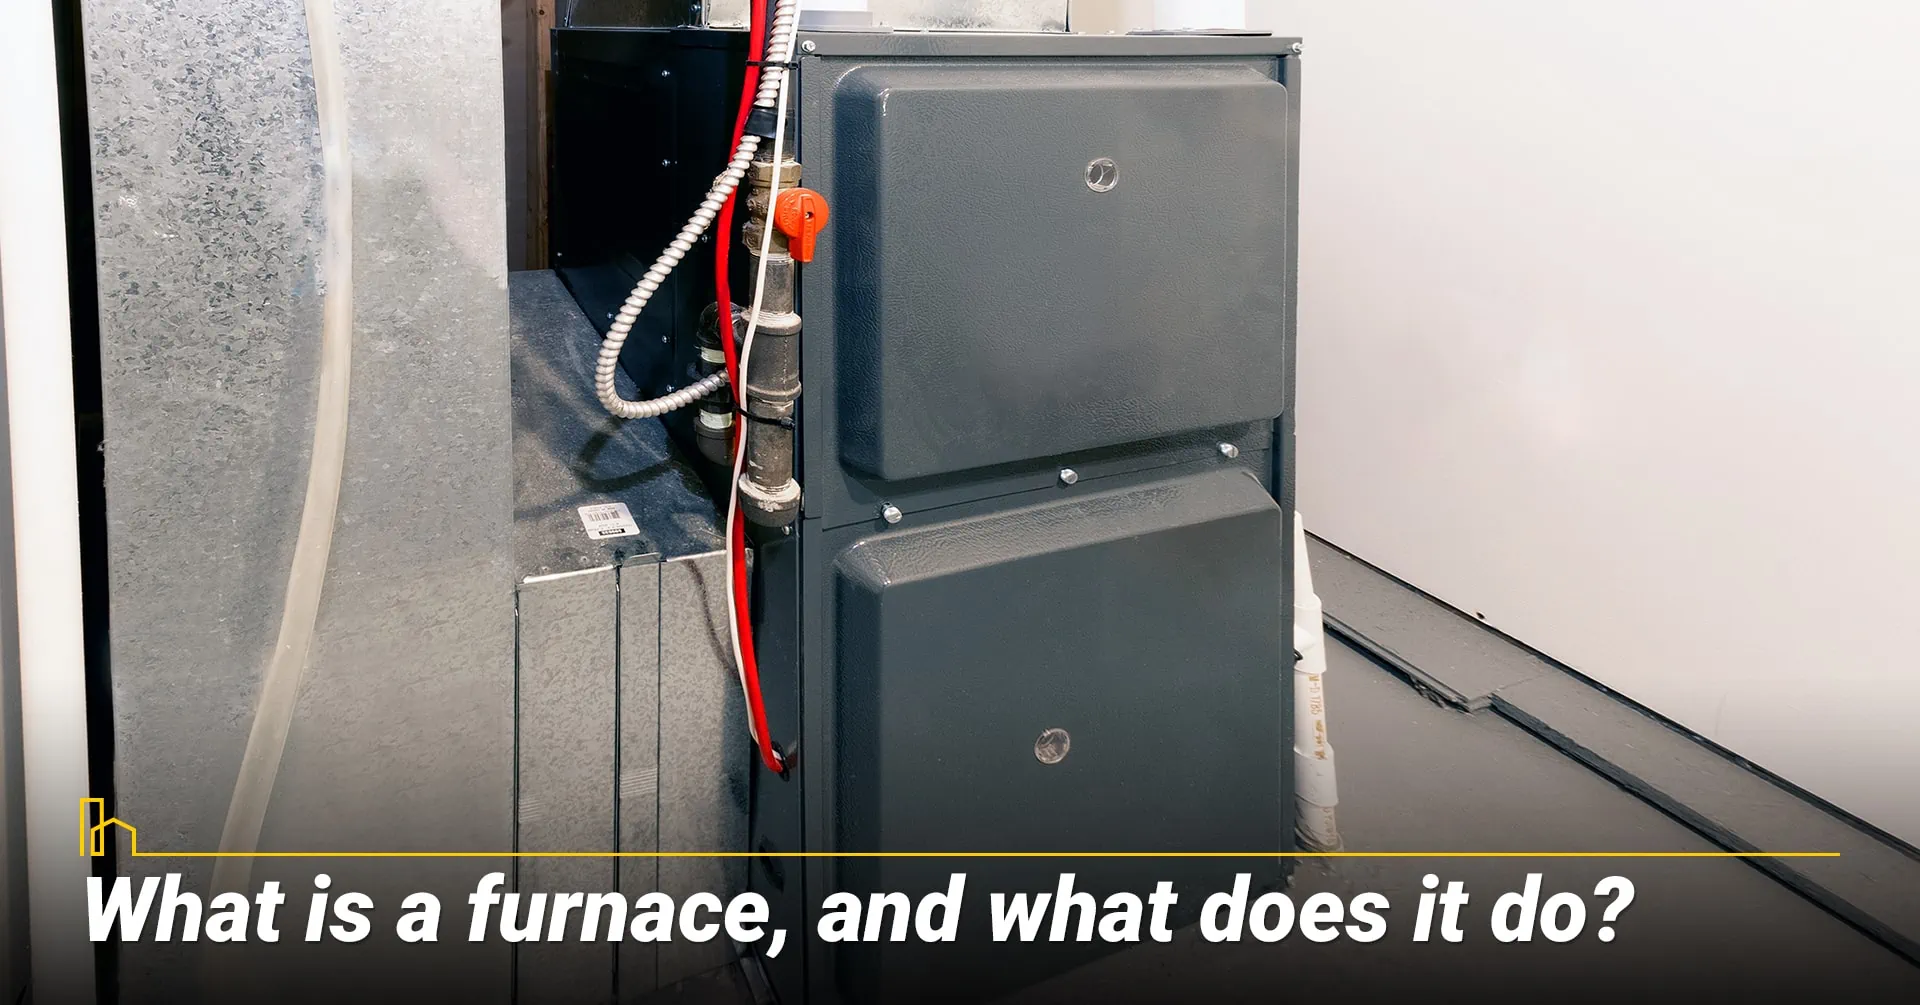 1. What is a furnace, and what does it do?